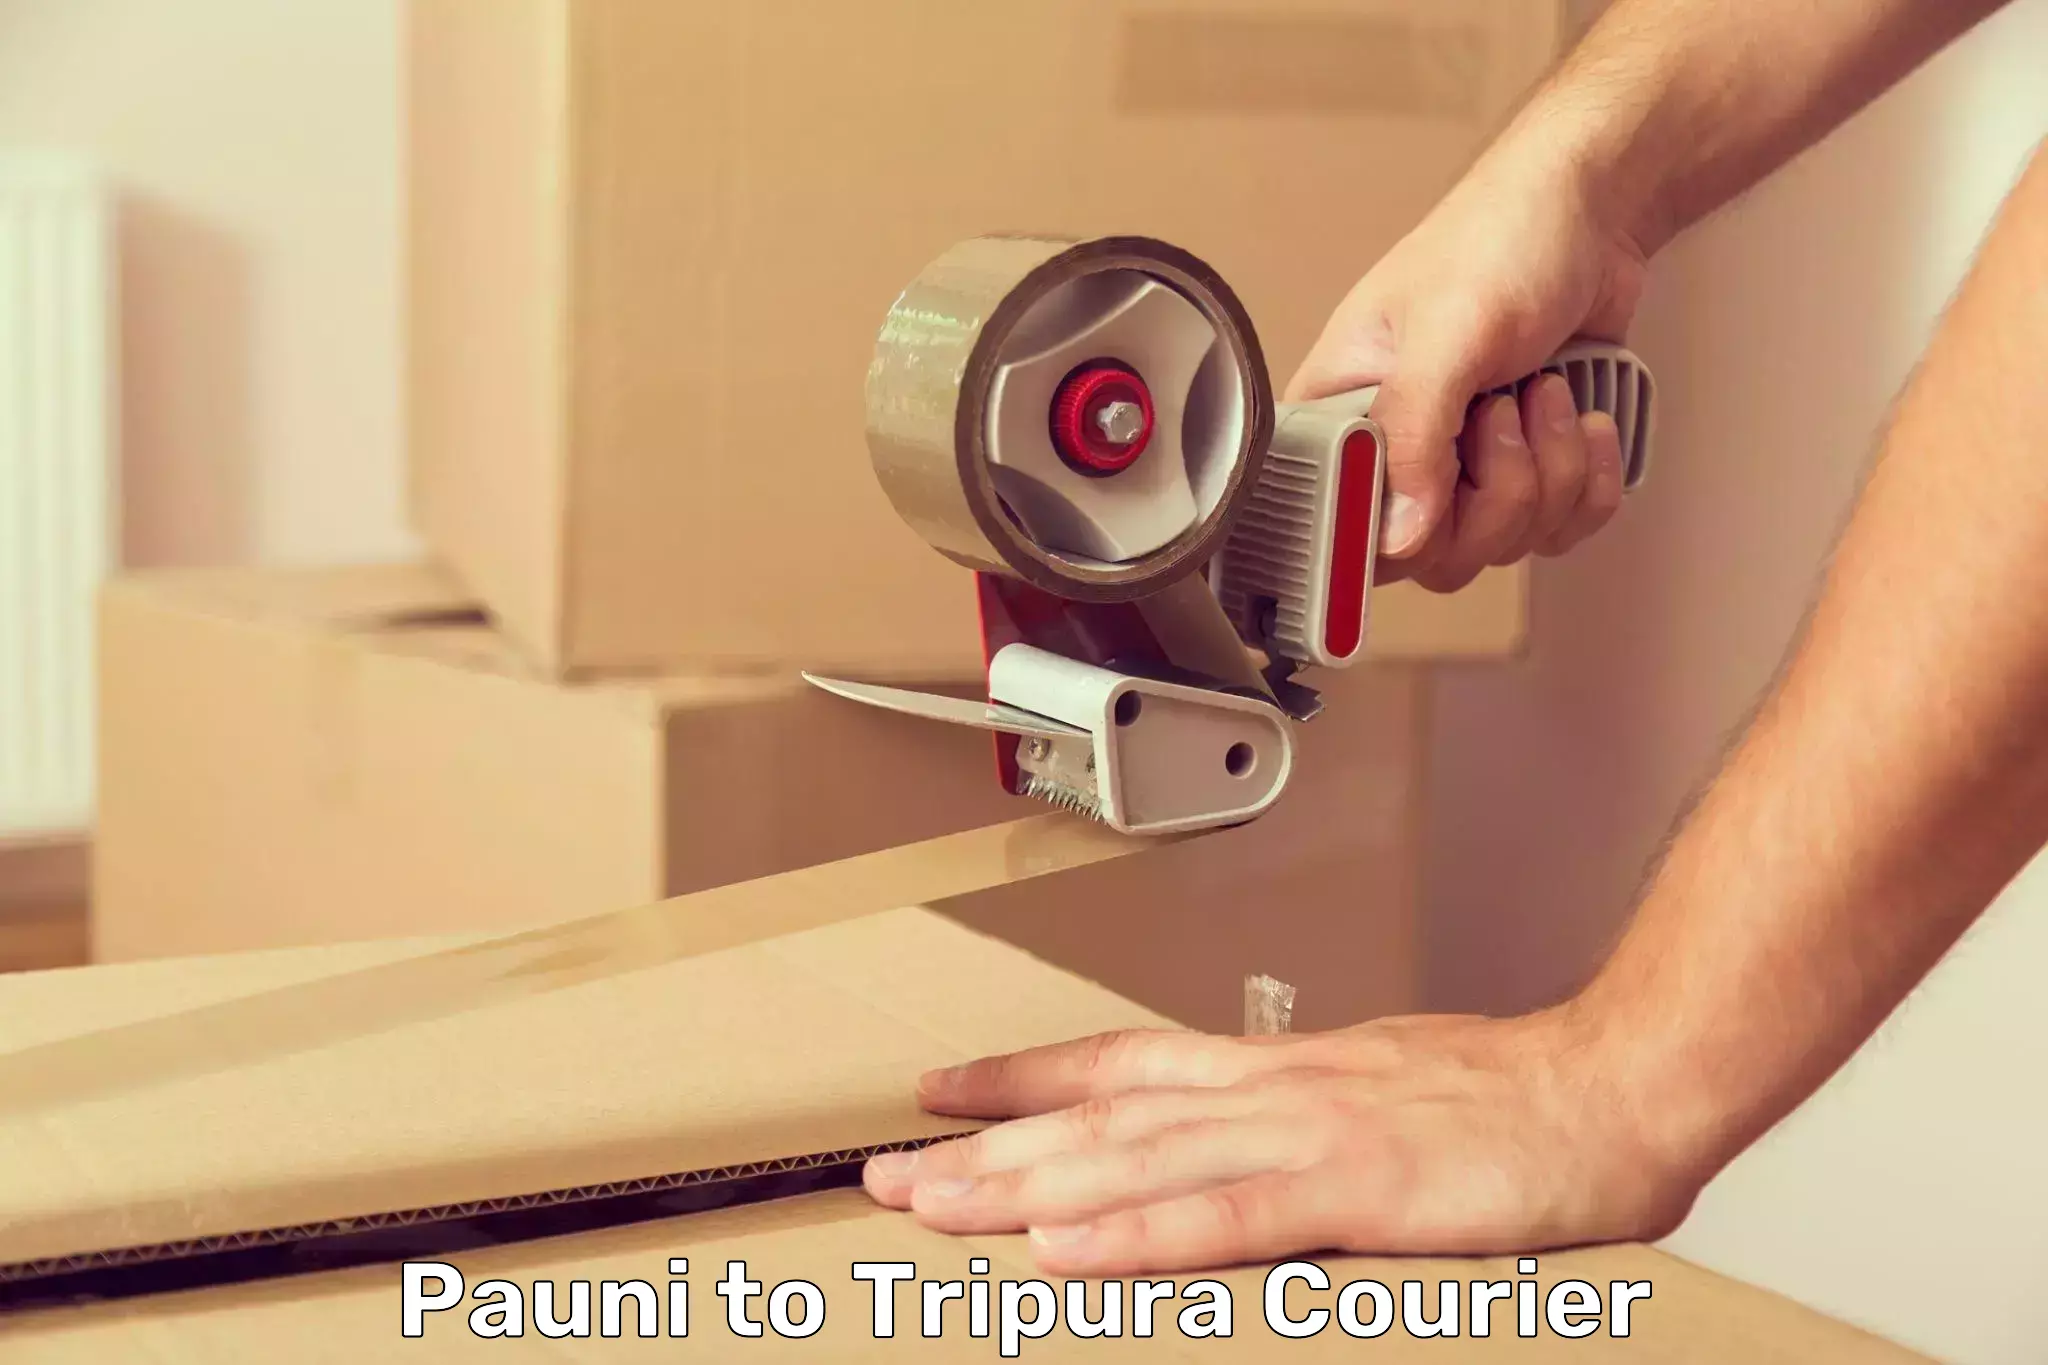 Cash on delivery service Pauni to Tripura